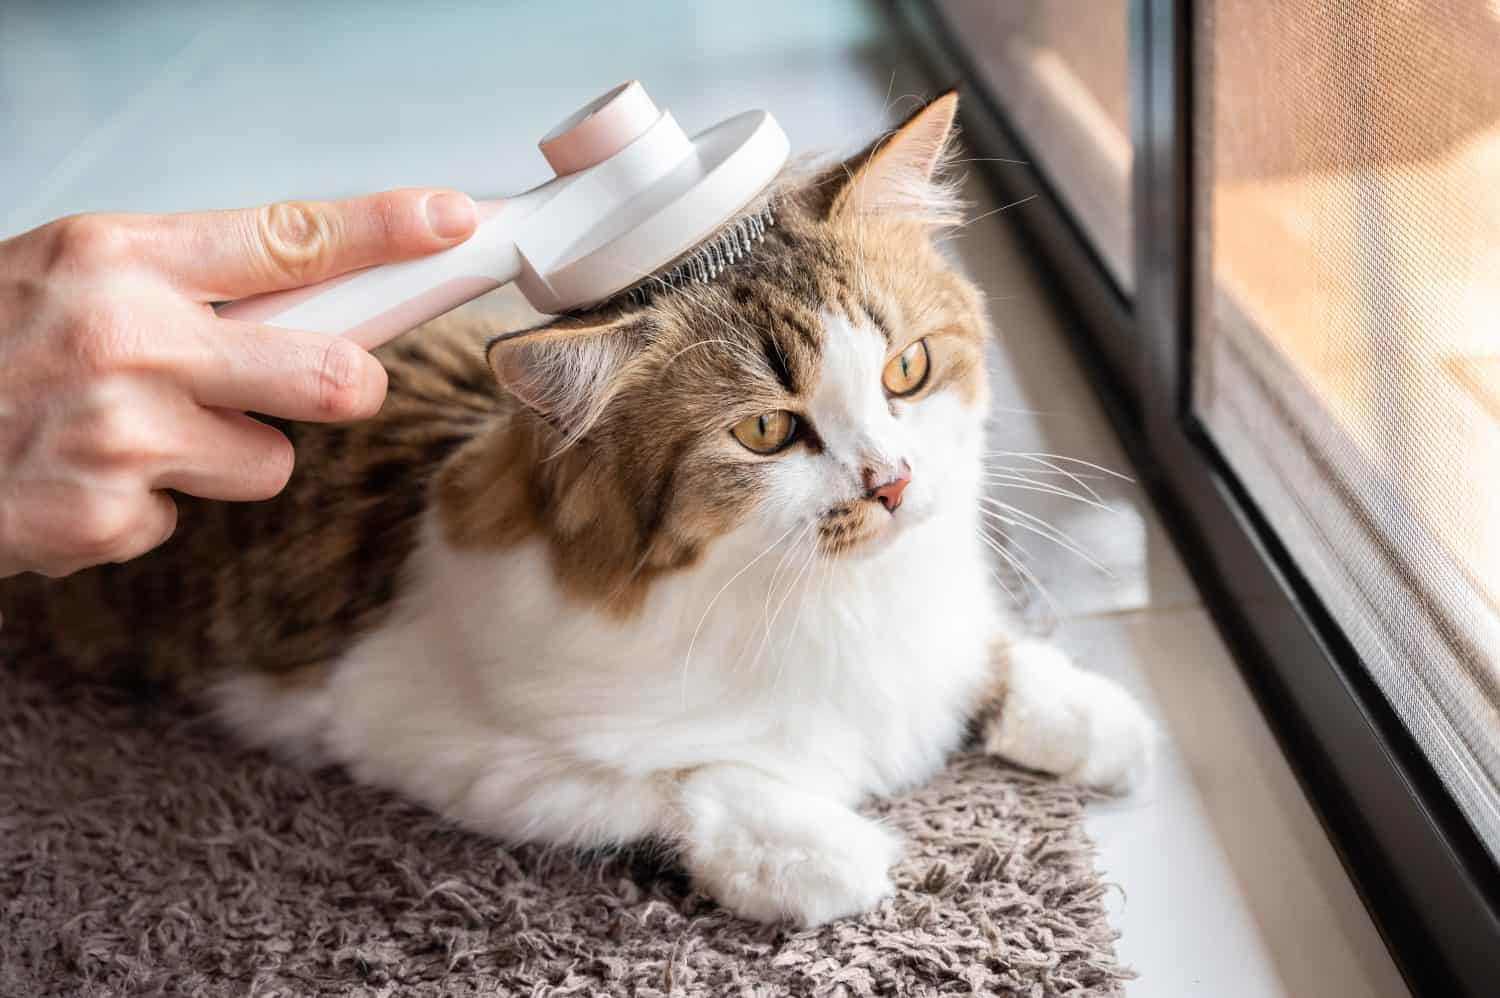 Cat owner using a brush for keep their hair from becoming tangled or matted. To minimize the amount of cat hair that escapes onto your clothes and to prevent your pet's fur from matting.